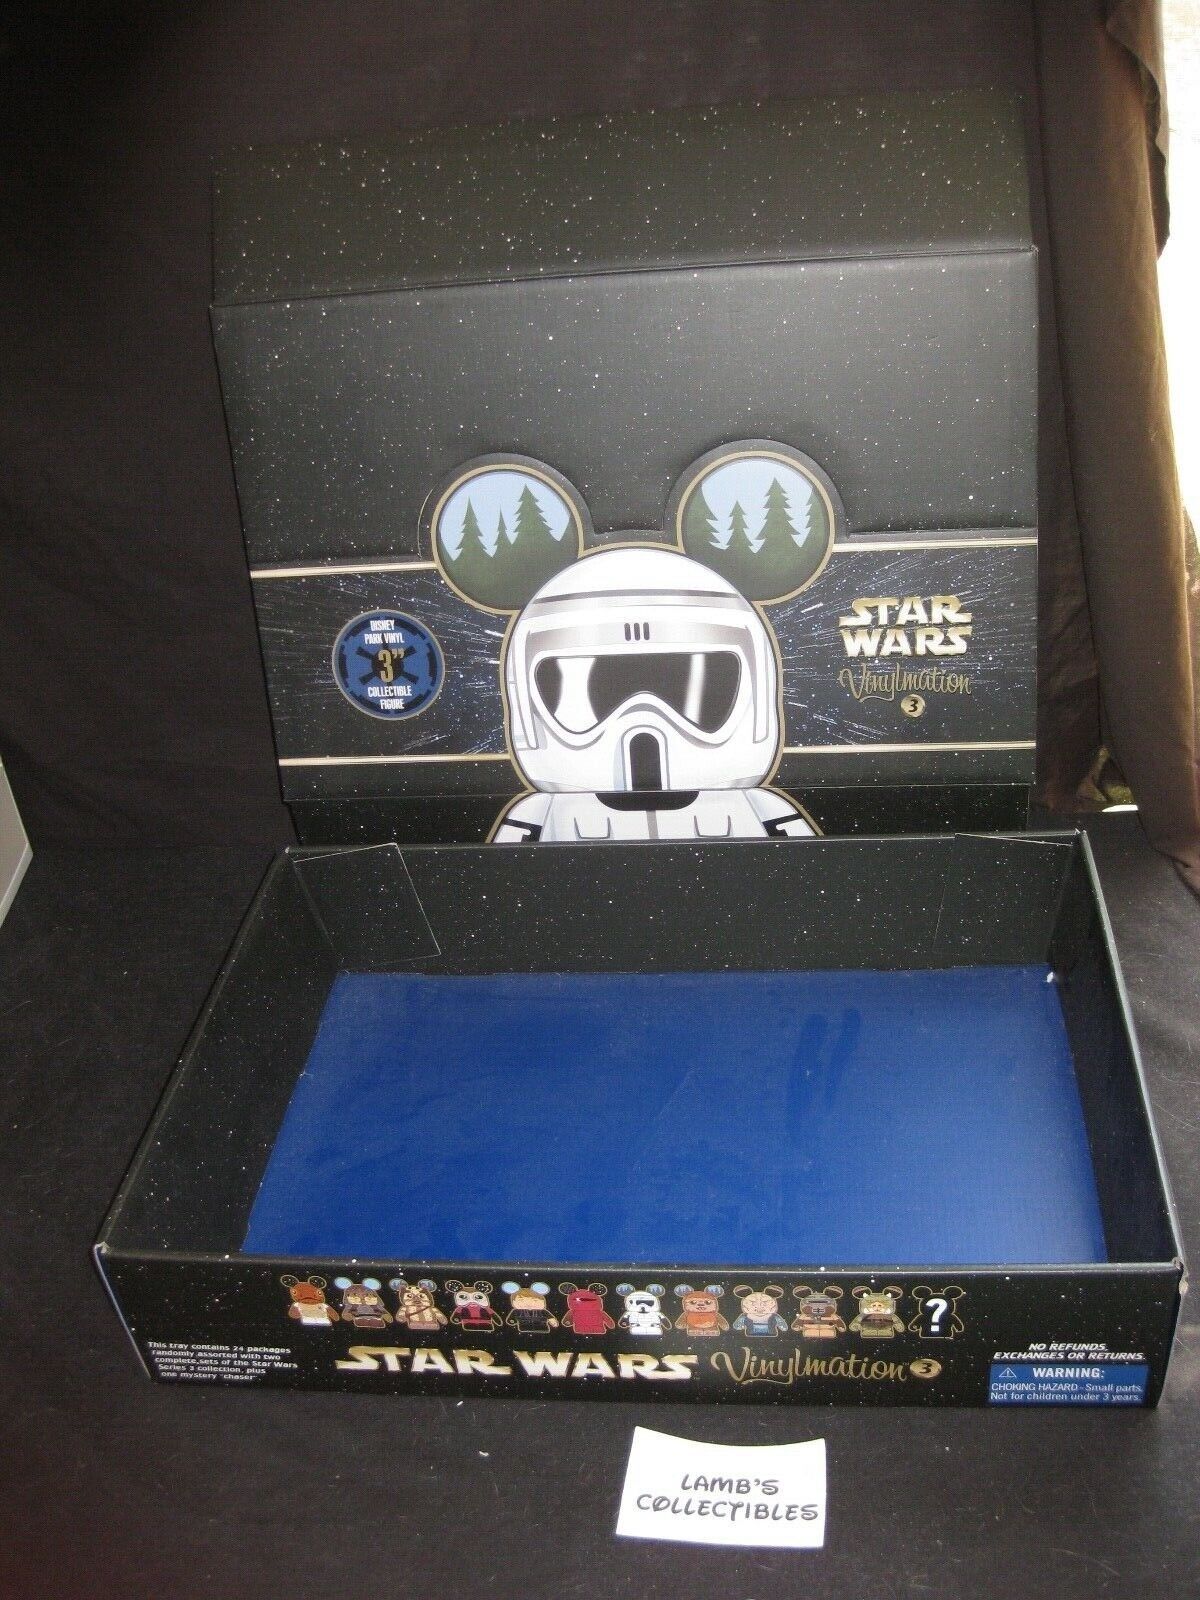 Primary image for Star Wars Vinylmation Series 3 Empty Display box with Lid only